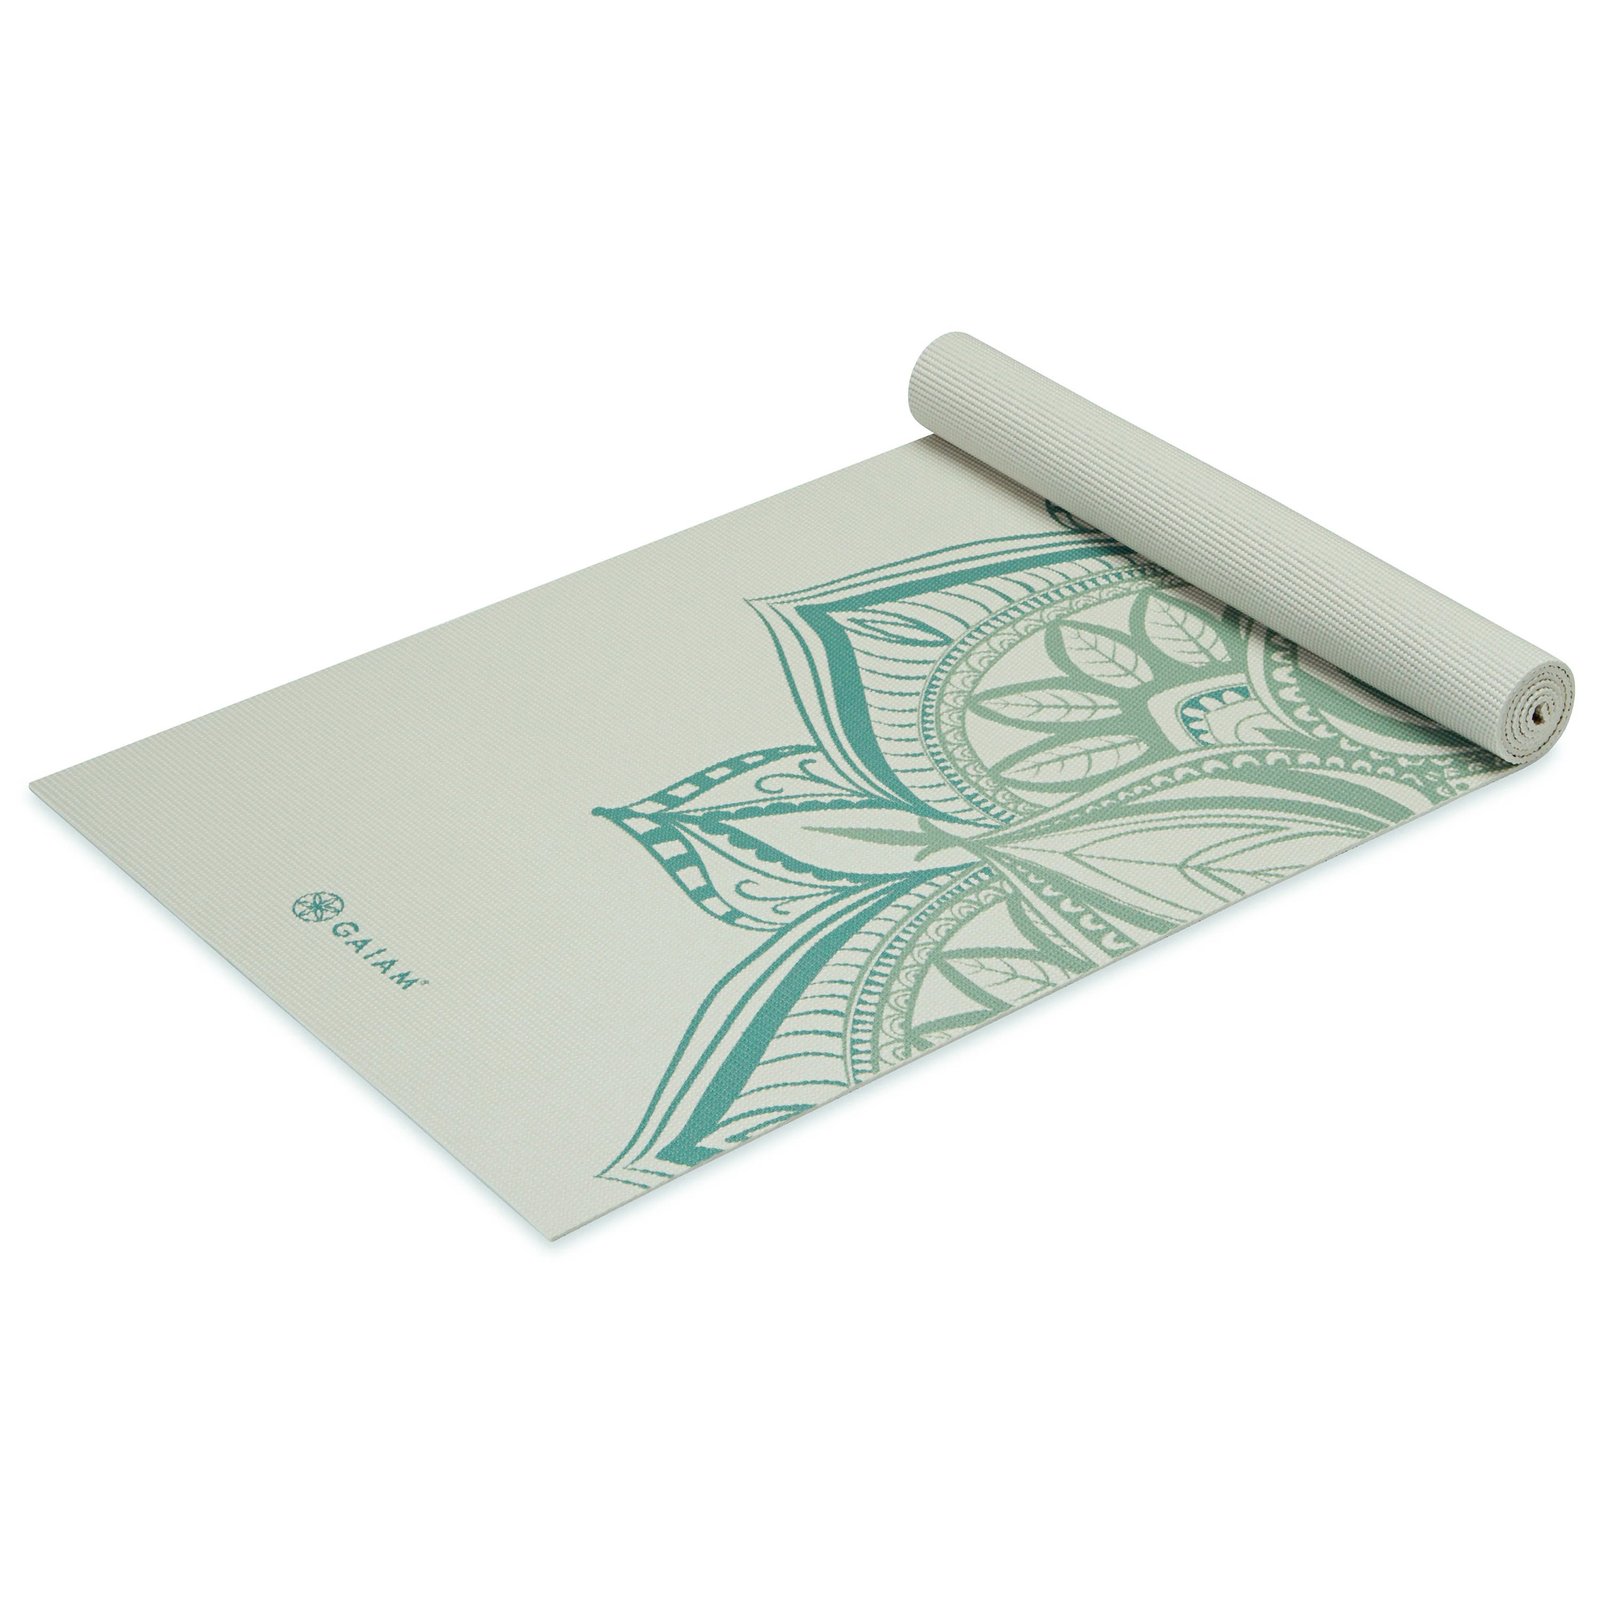 GAIAM Vintage Green Point Yoga Mat 5mm Classic Printed 1 st